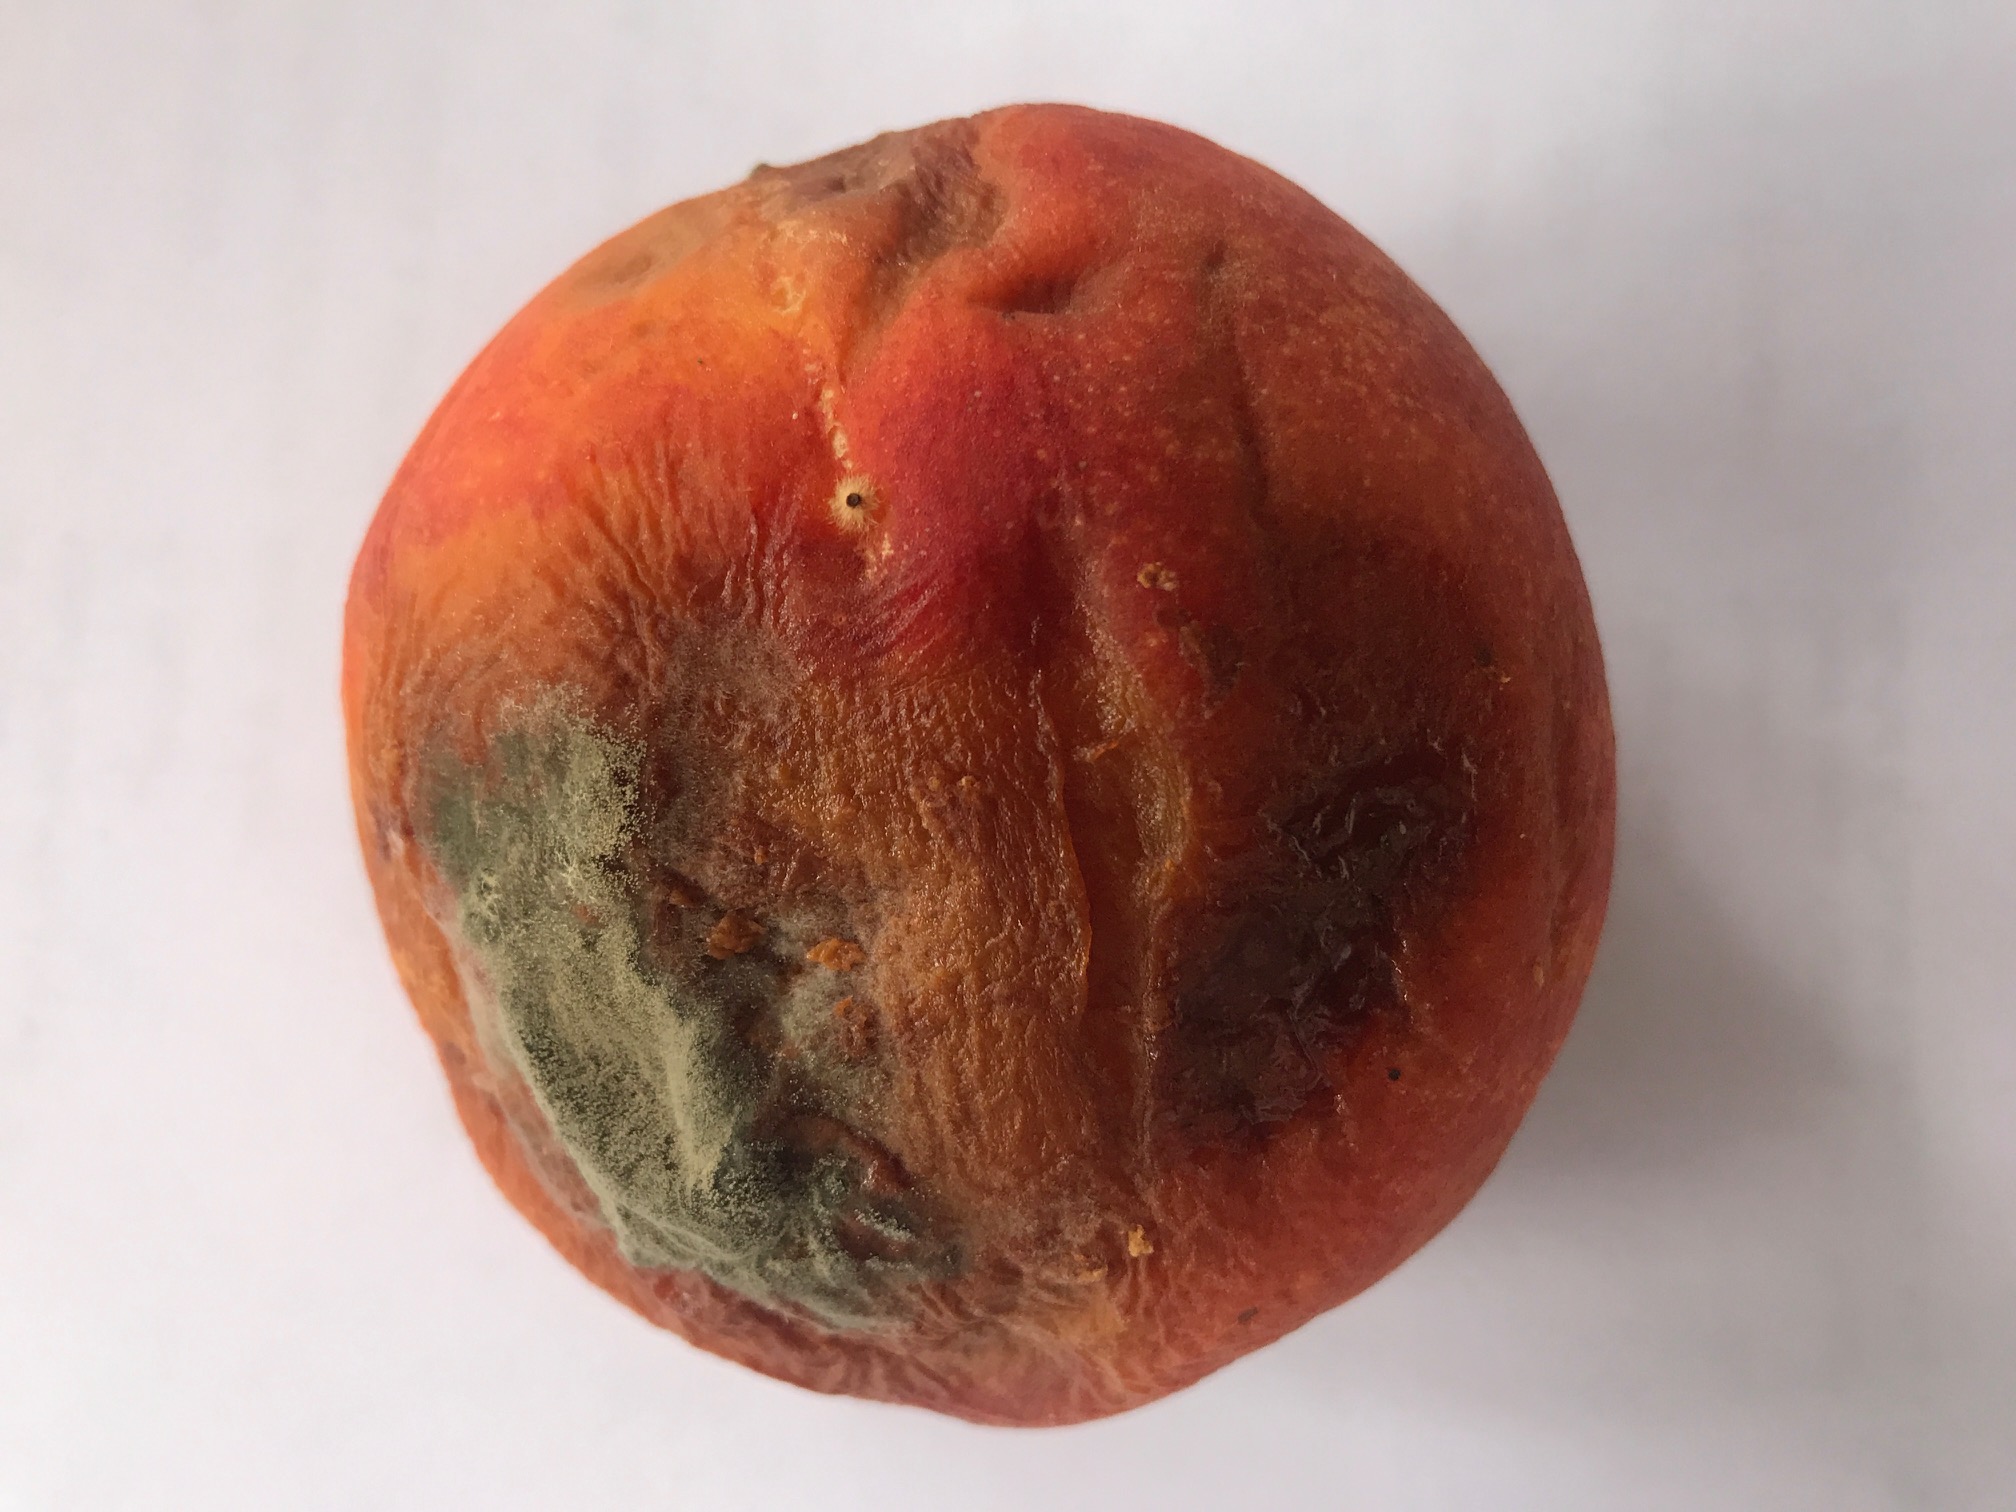 This peach, bruises and mold and all, could have saved some child’s life, at least for another day or two.